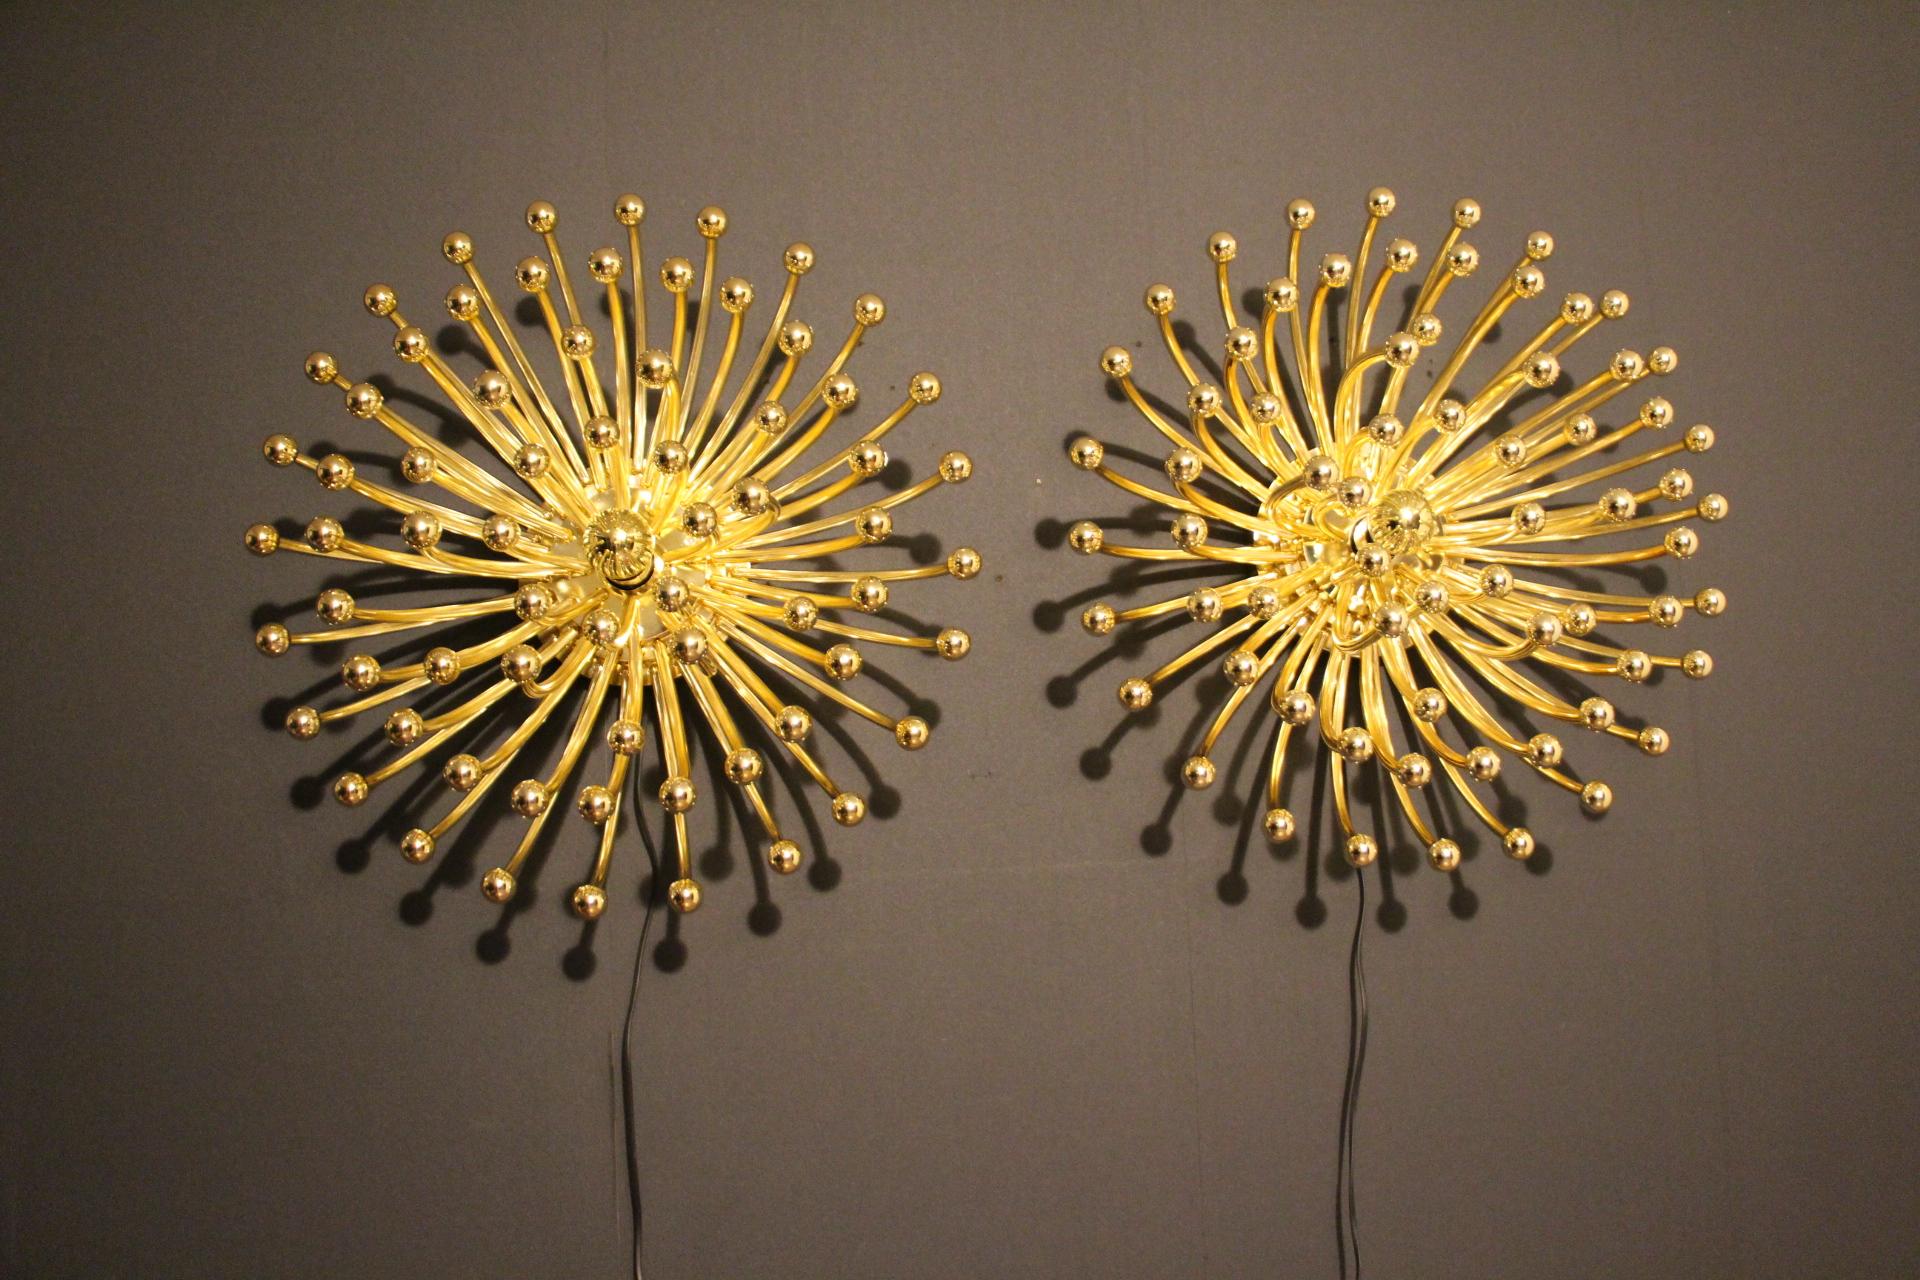  60 cm Gold Pistillo Chandeliers, table lamps or Wall Lamps By Valenti Milano For Sale 10